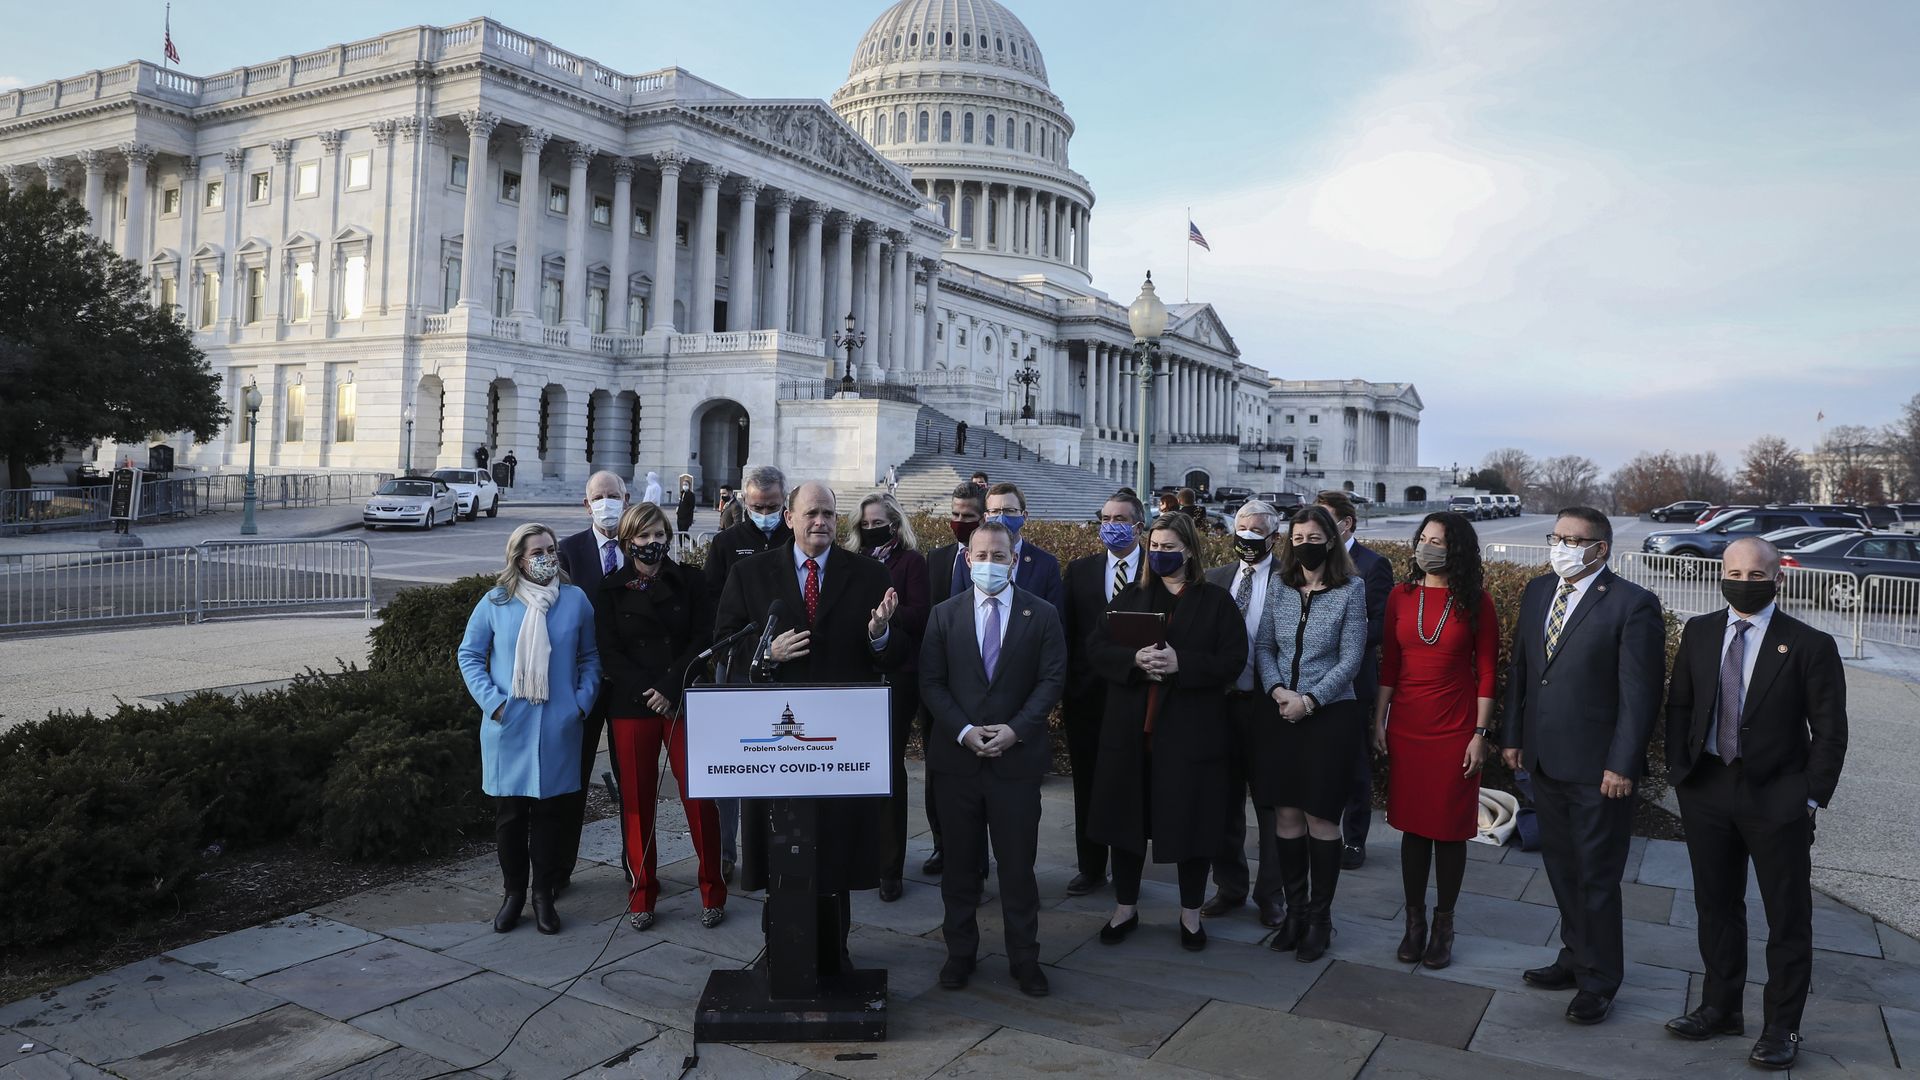 Members of the Problem Solvers Caucus are seen speaking outside the U.S. Capitol.